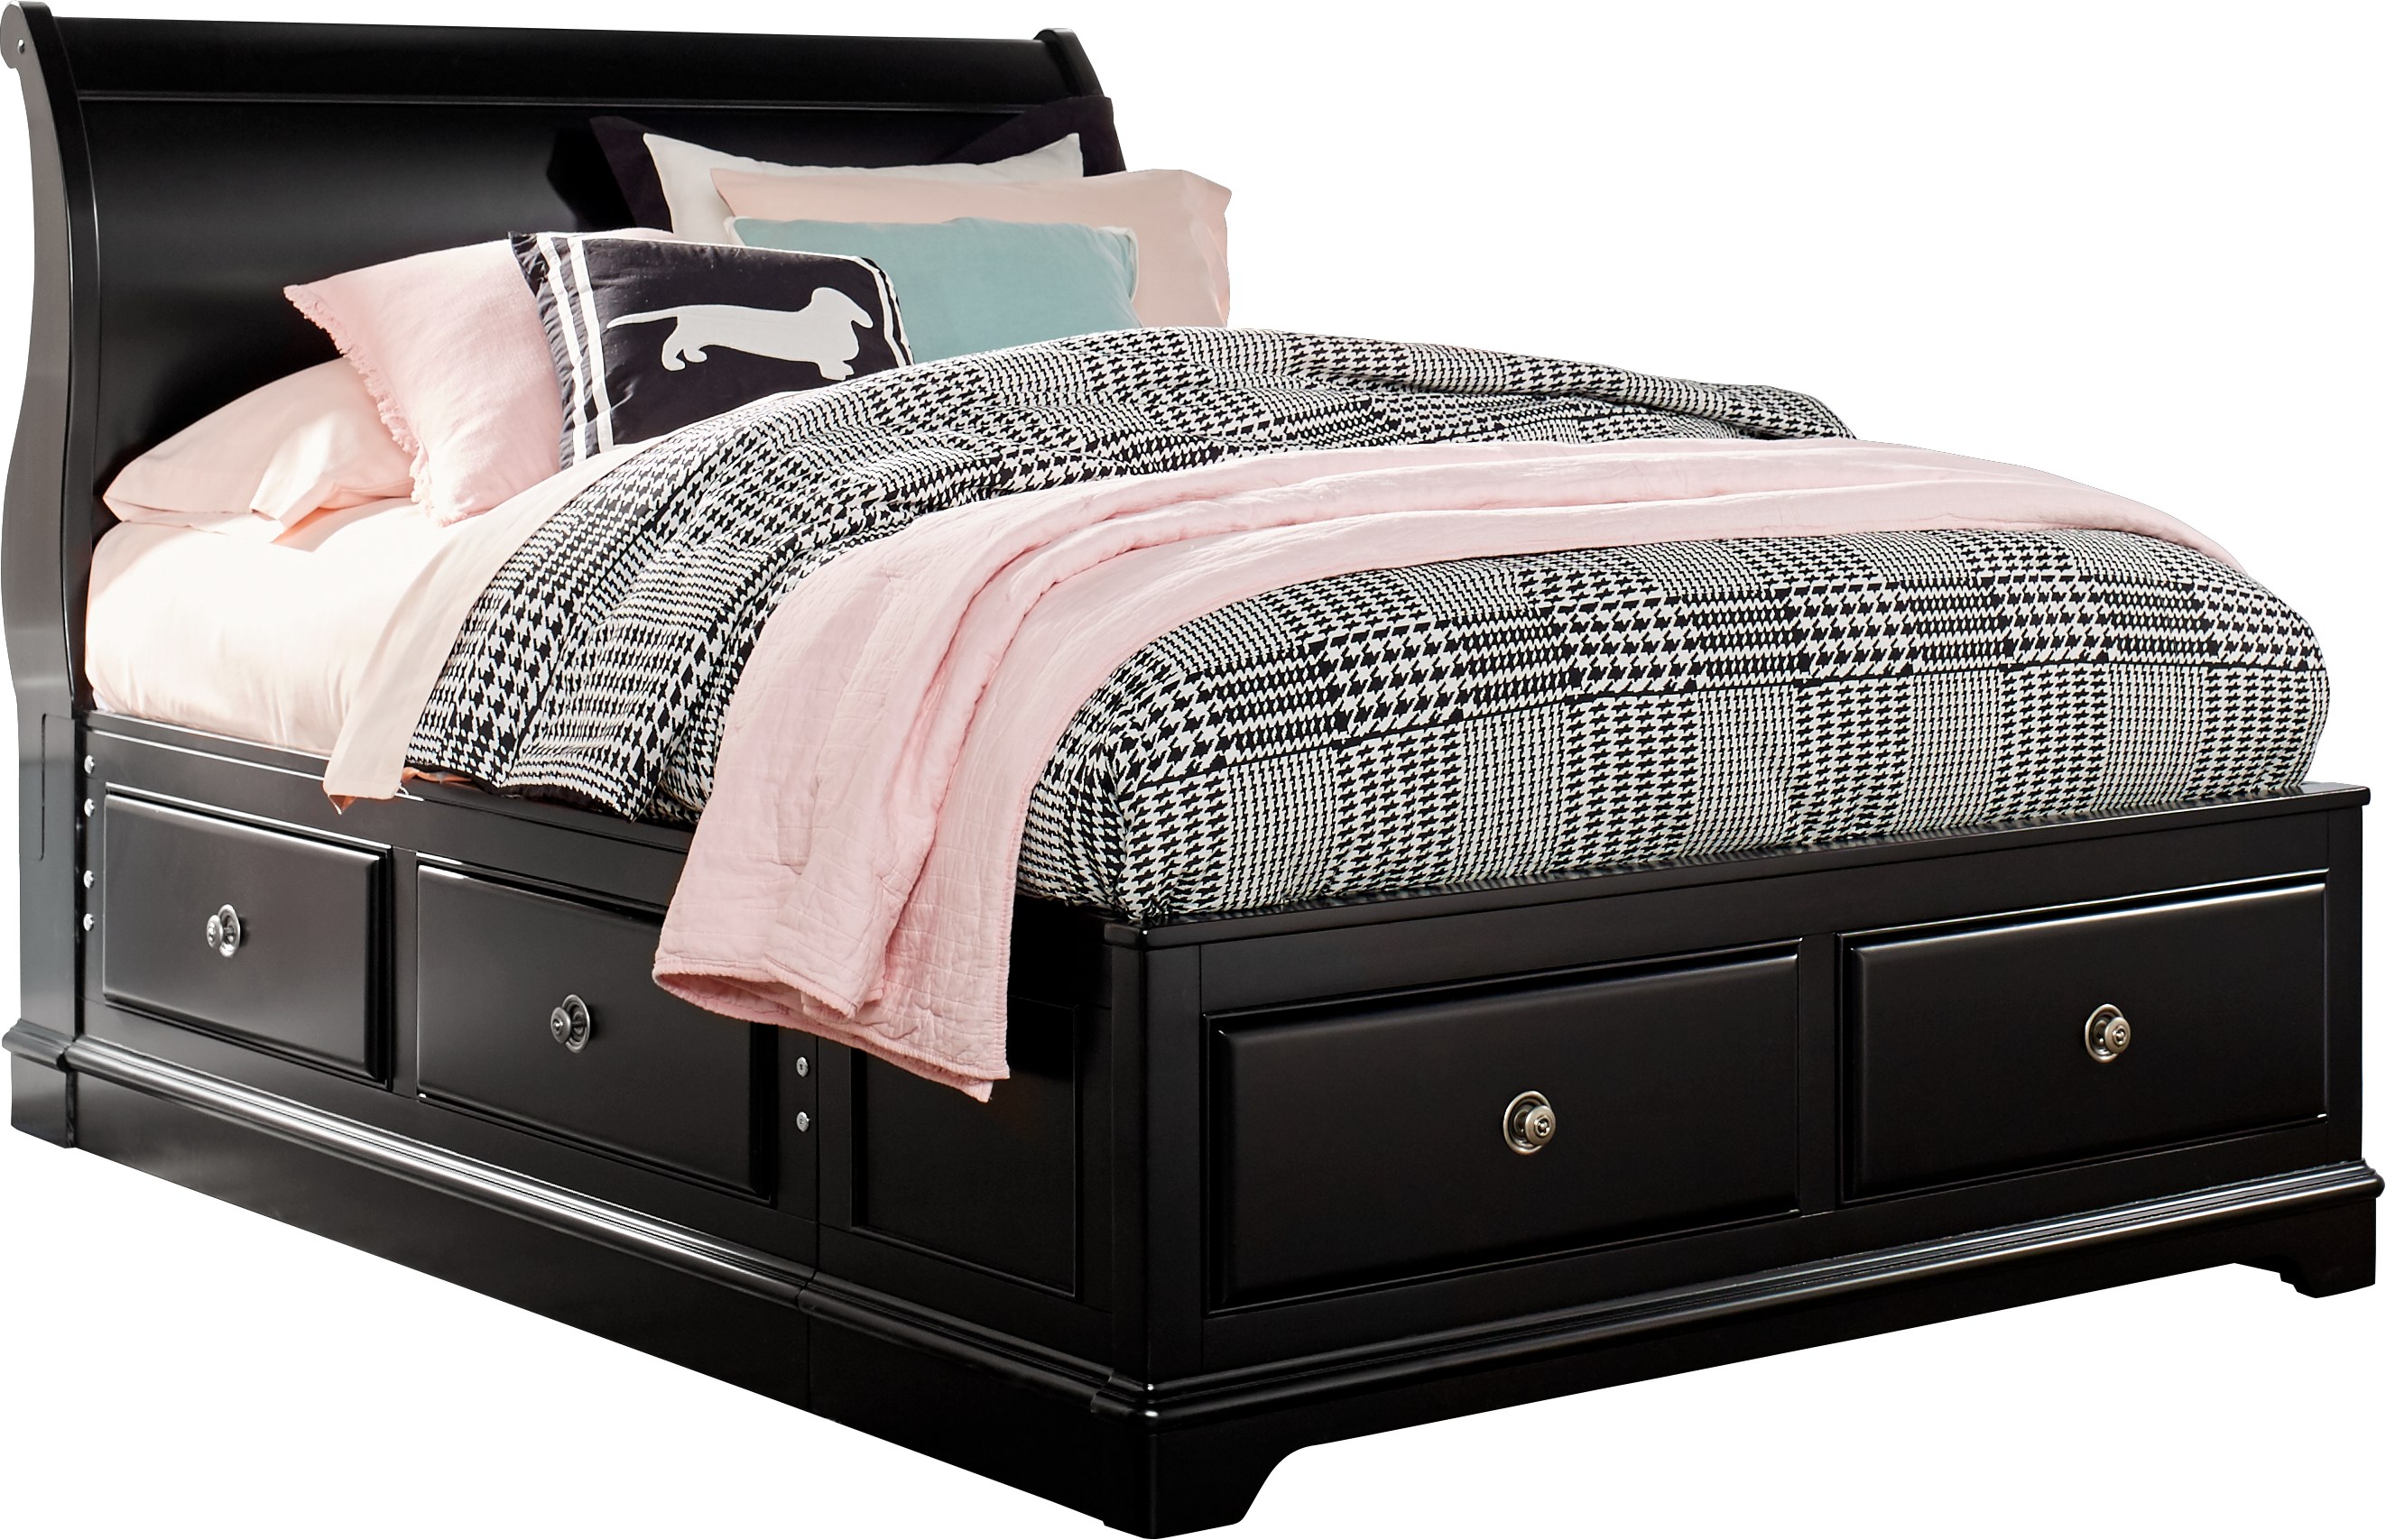 Oberon Black 3 Pc Twin Sleigh Bed with 4 Drawer Storage - Twin Beds Colors